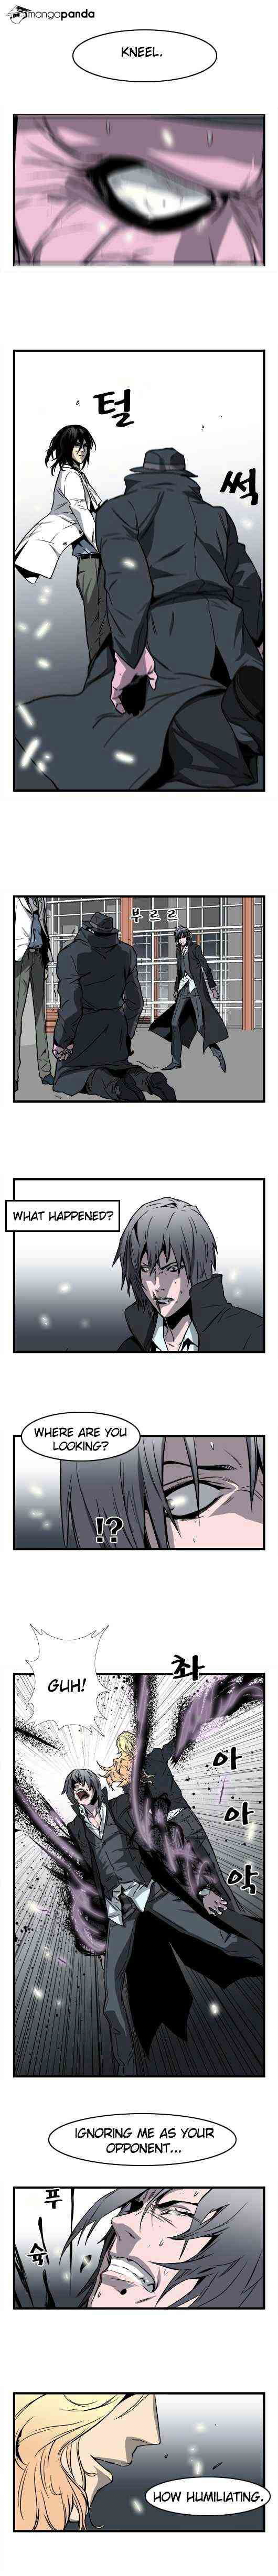 Noblesse Chapter 32 page 4